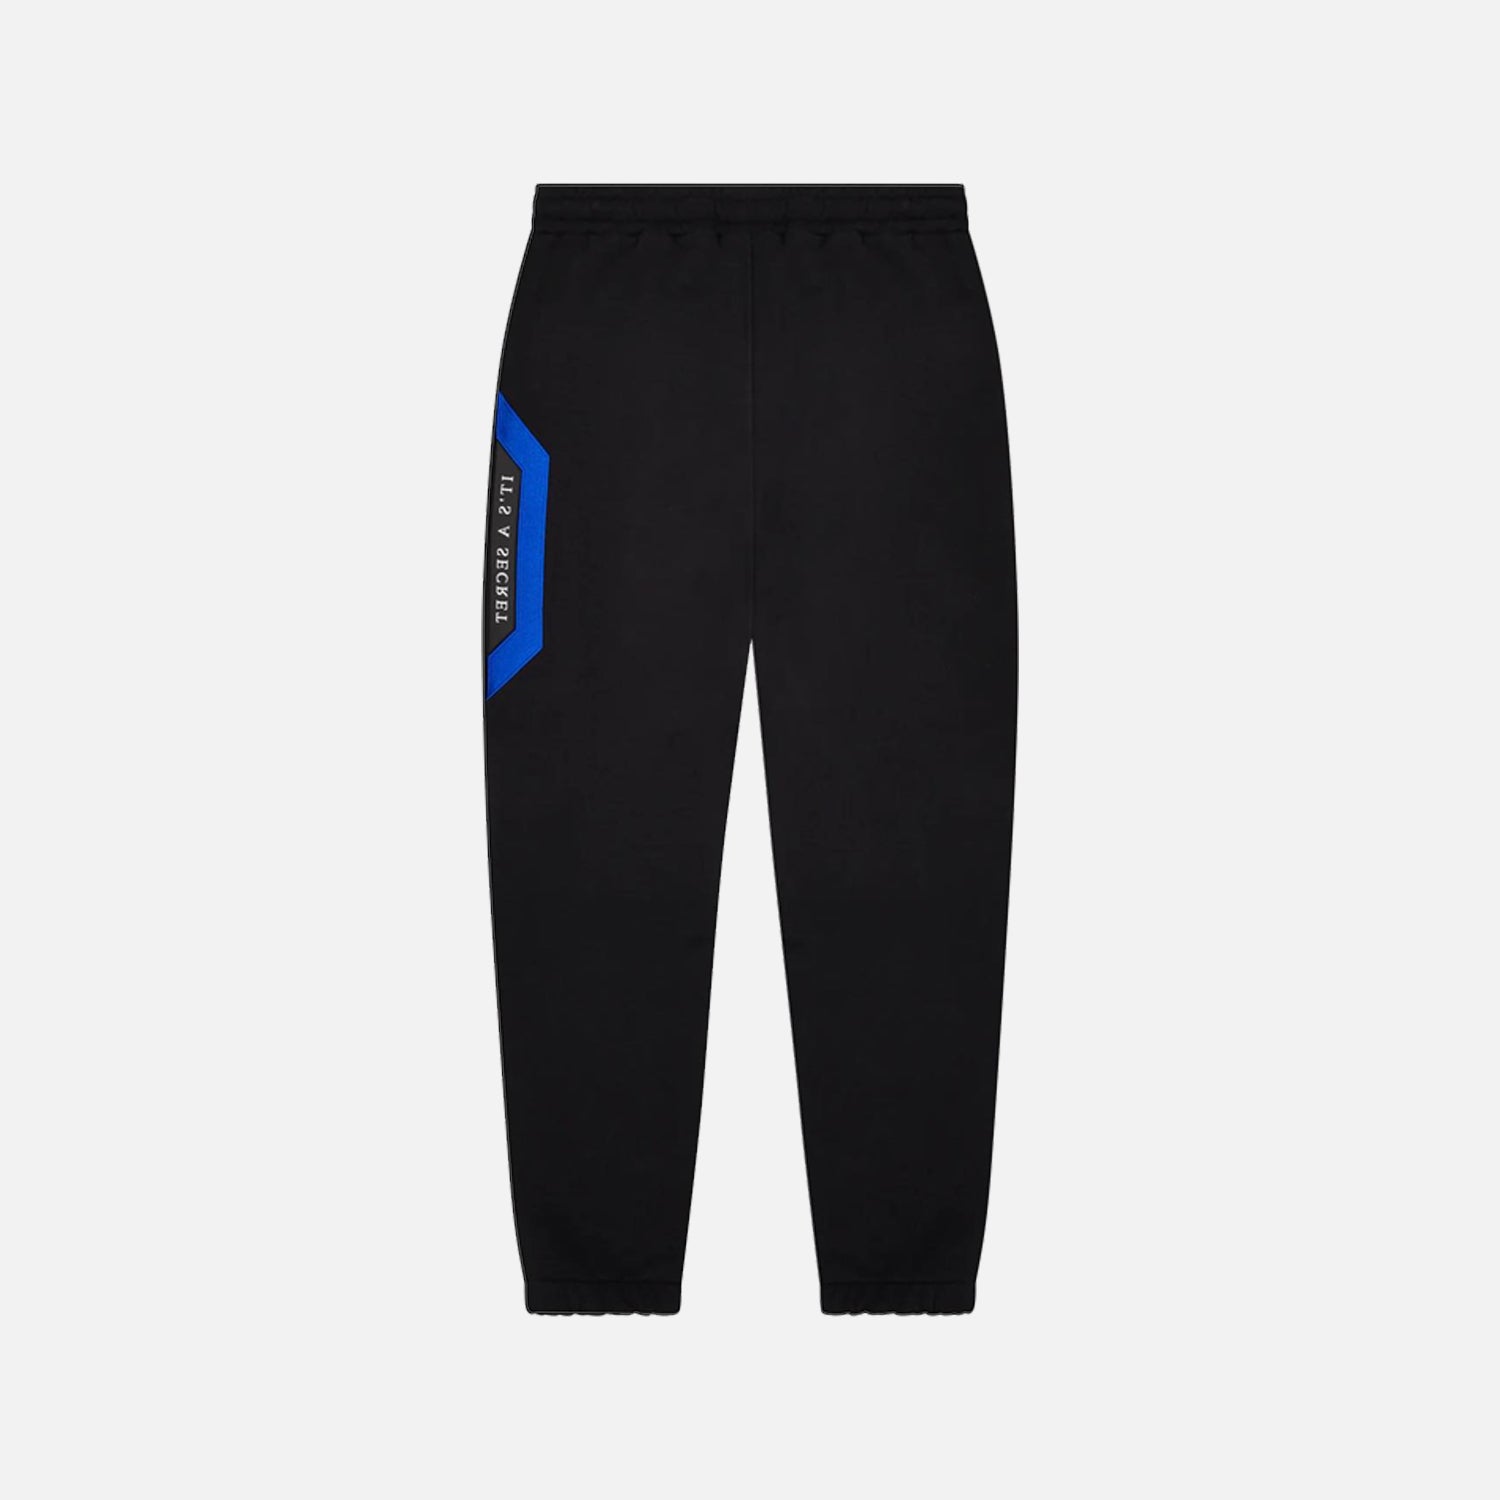 Trapstar Irongate Hooded Tracksuit - Black/Blue